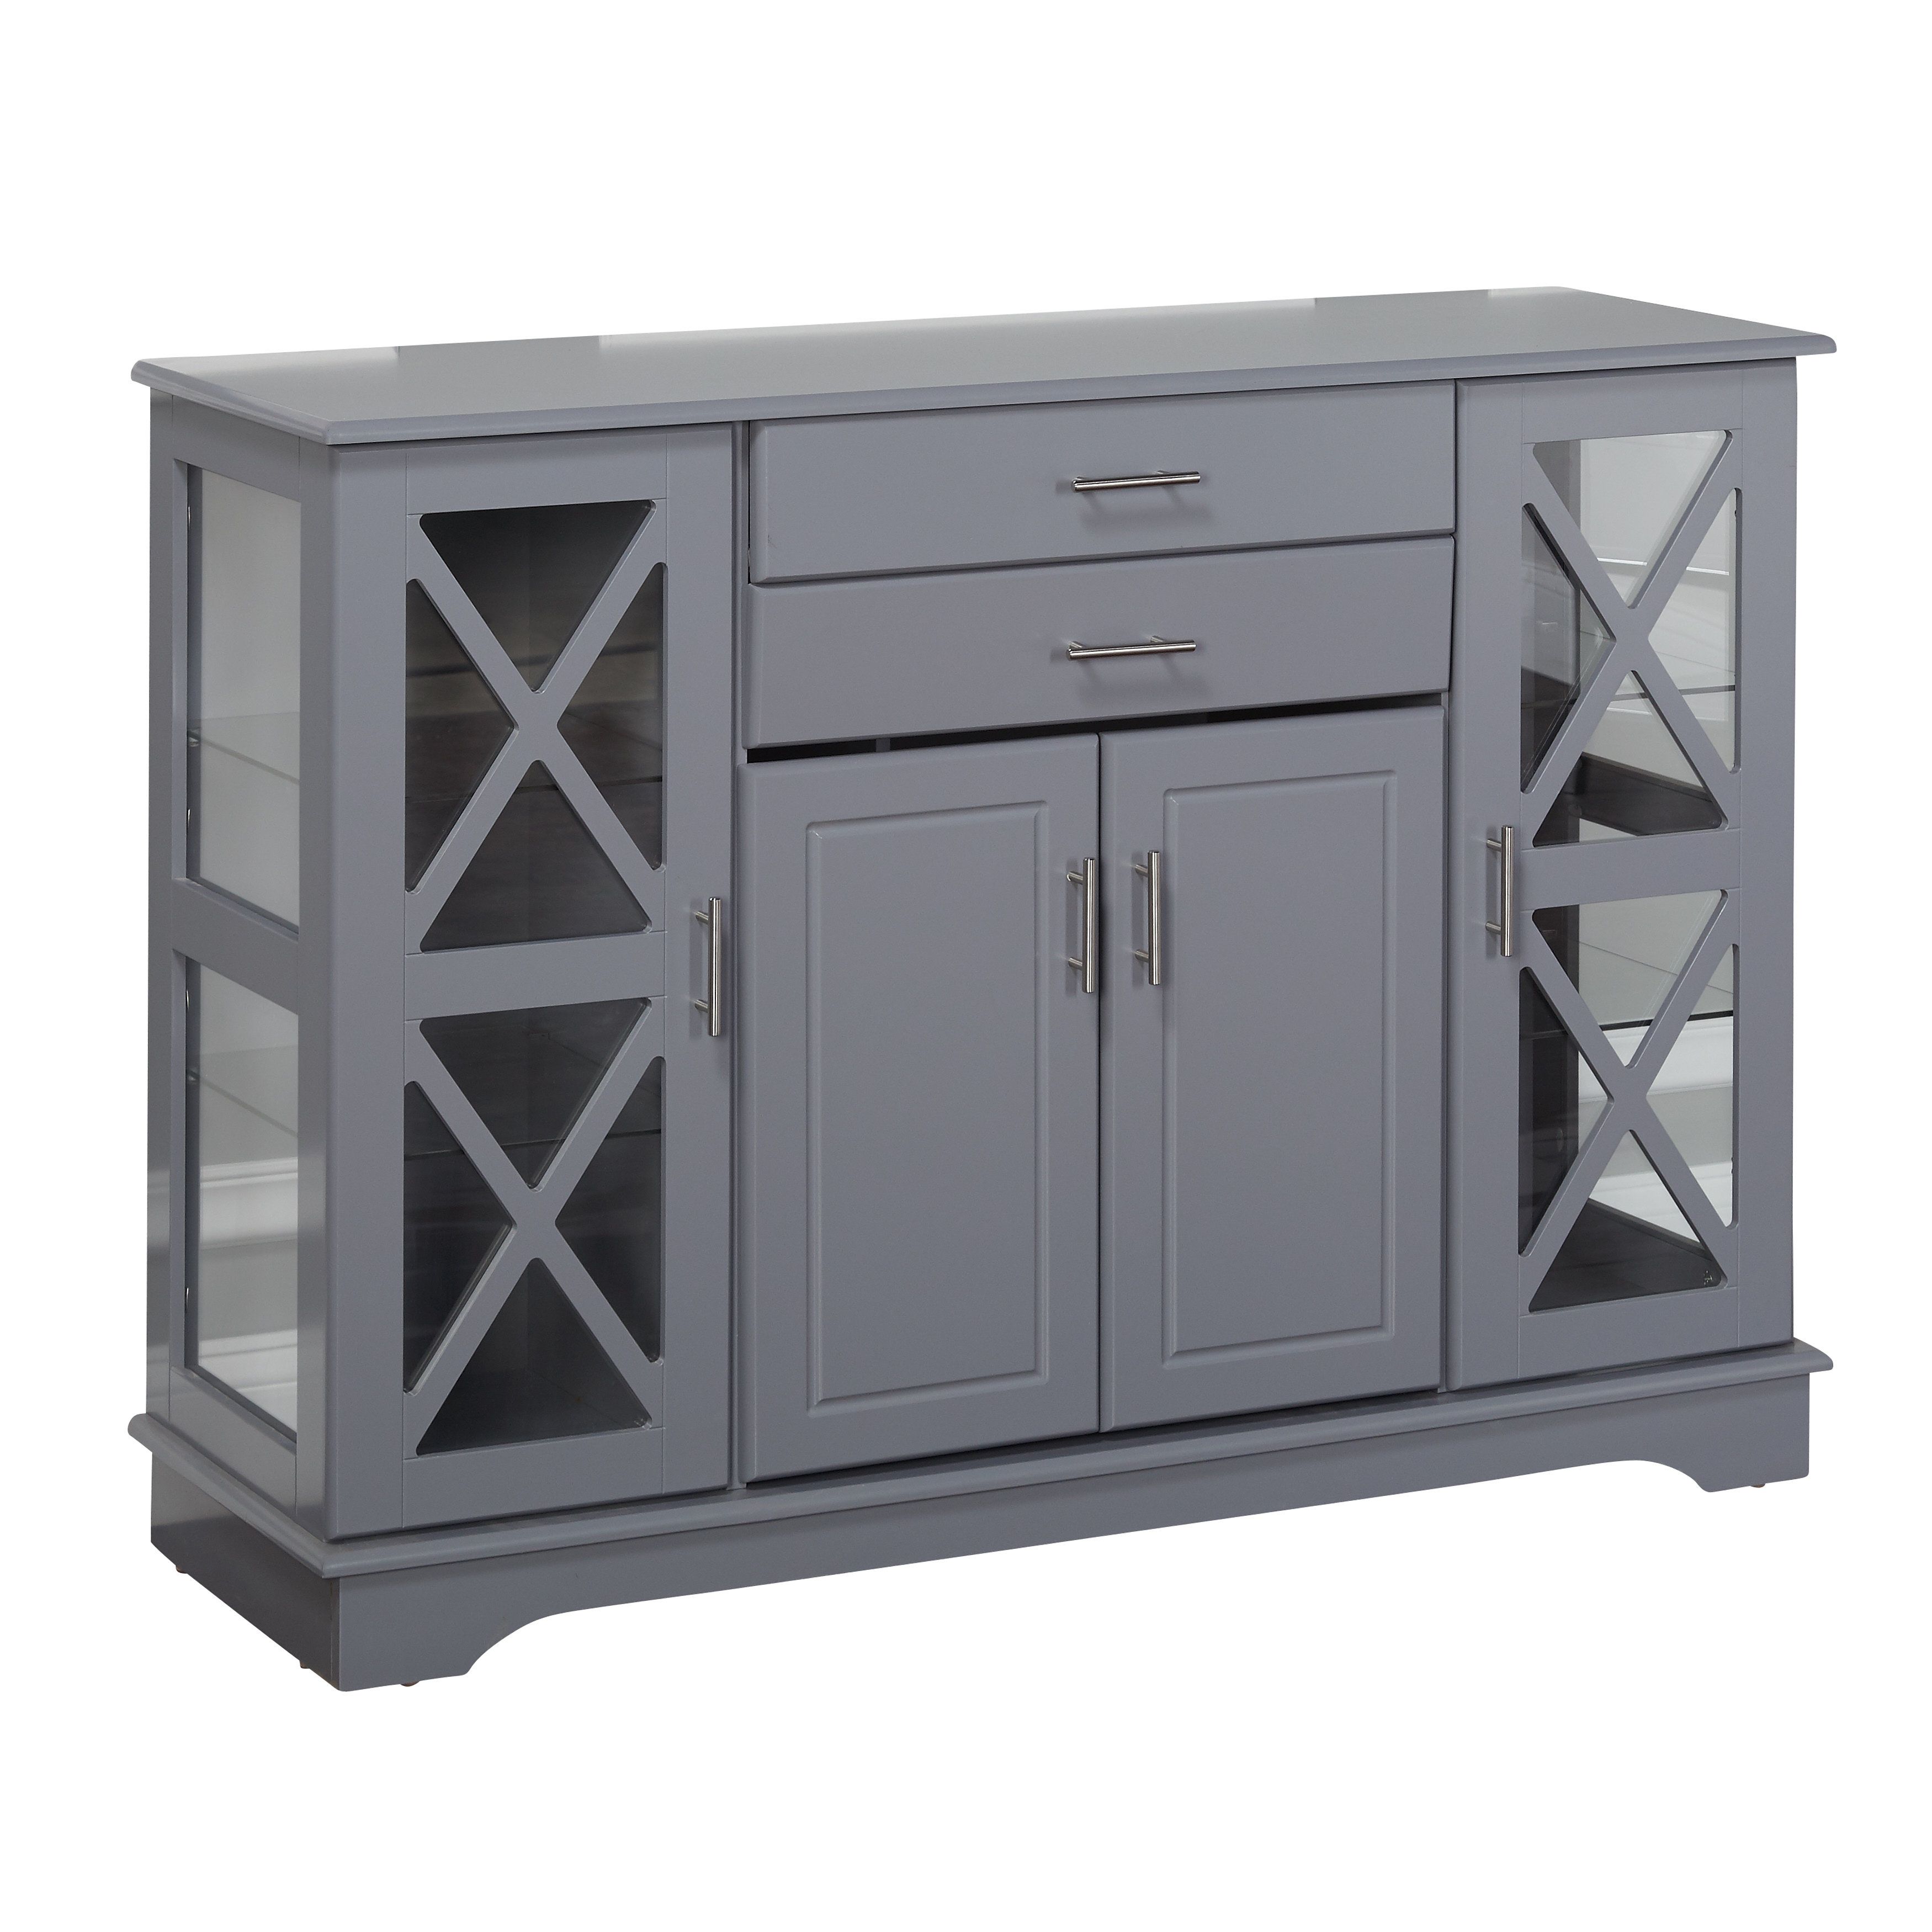 Farmhouse / Country Sideboards & Buffets | Birch Lane With Amityville Wood Sideboards (View 26 of 30)